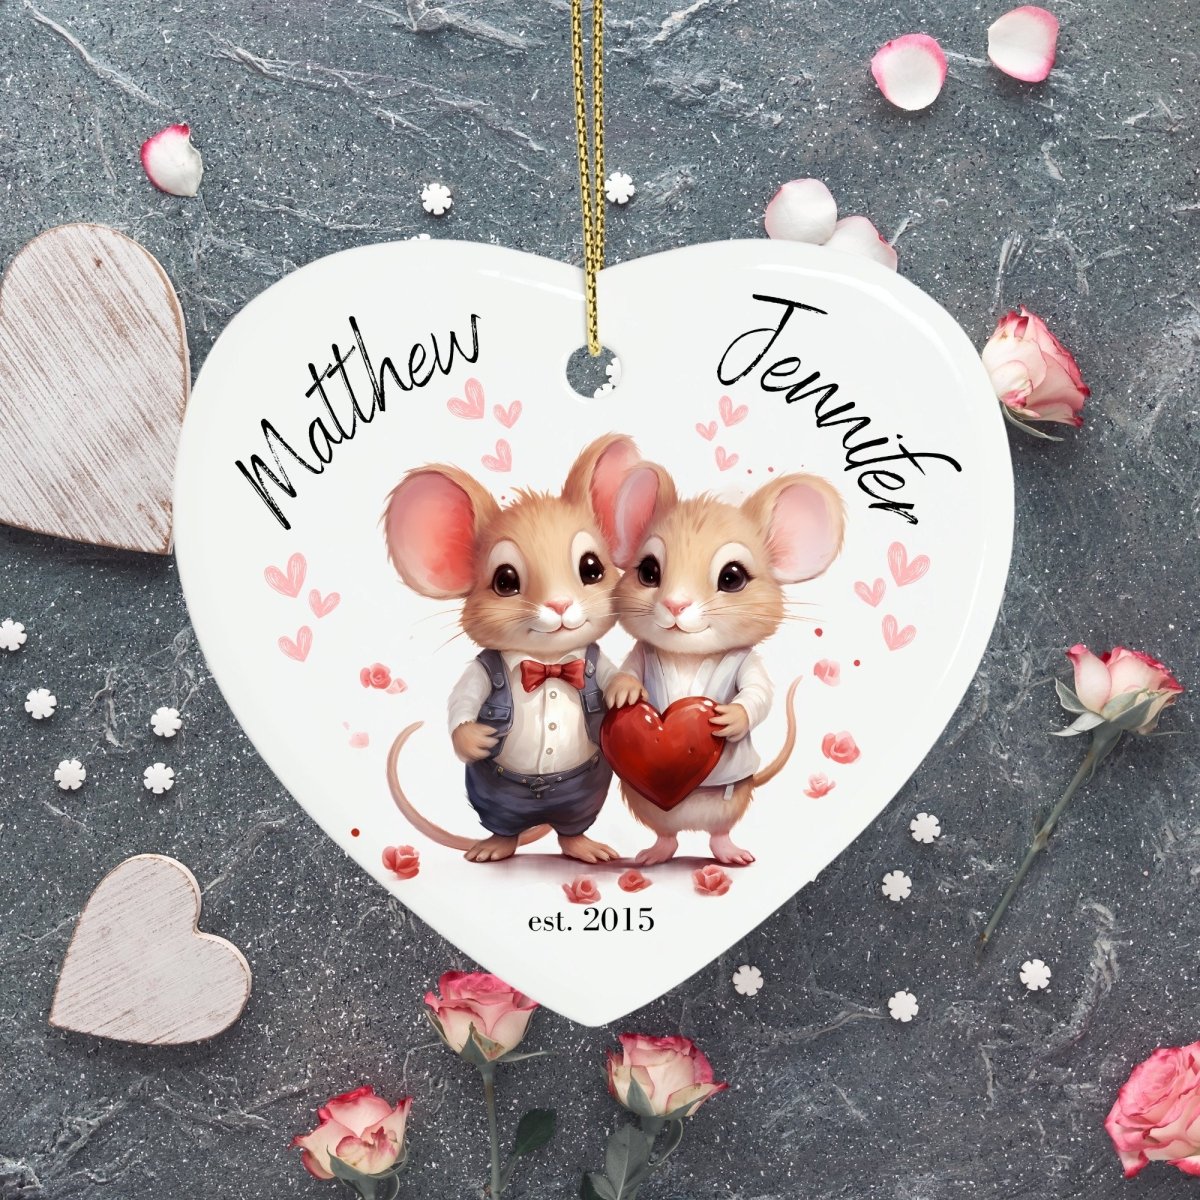 Cute personalised Mouse Couple Ornament Ceramic Heart Ornament Lovers Keepsake Valentines Day Gift Anniversary Gift Idea for Soulmates - Everything Pixel